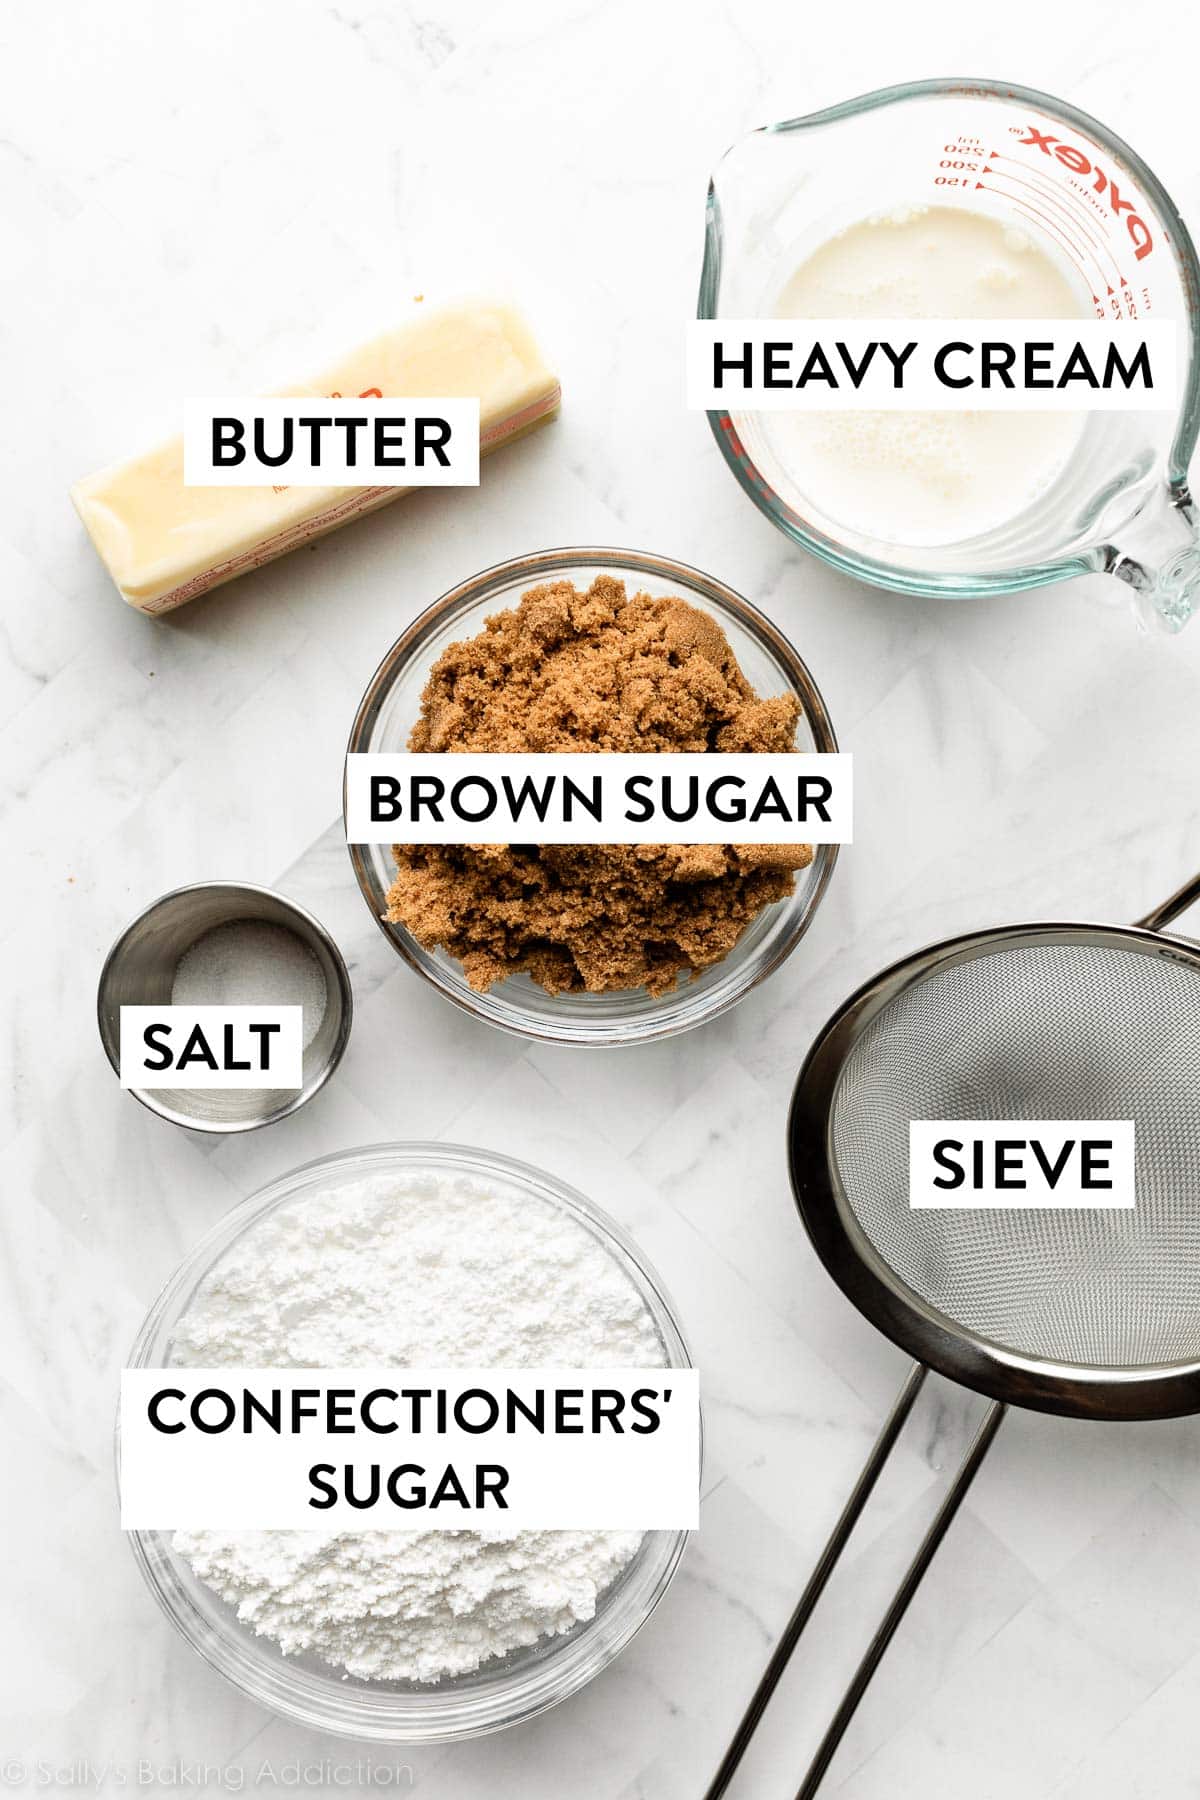 brown sugar, heavy cream, salt, confectioners' sugar, butter, and sieve on marble counter.